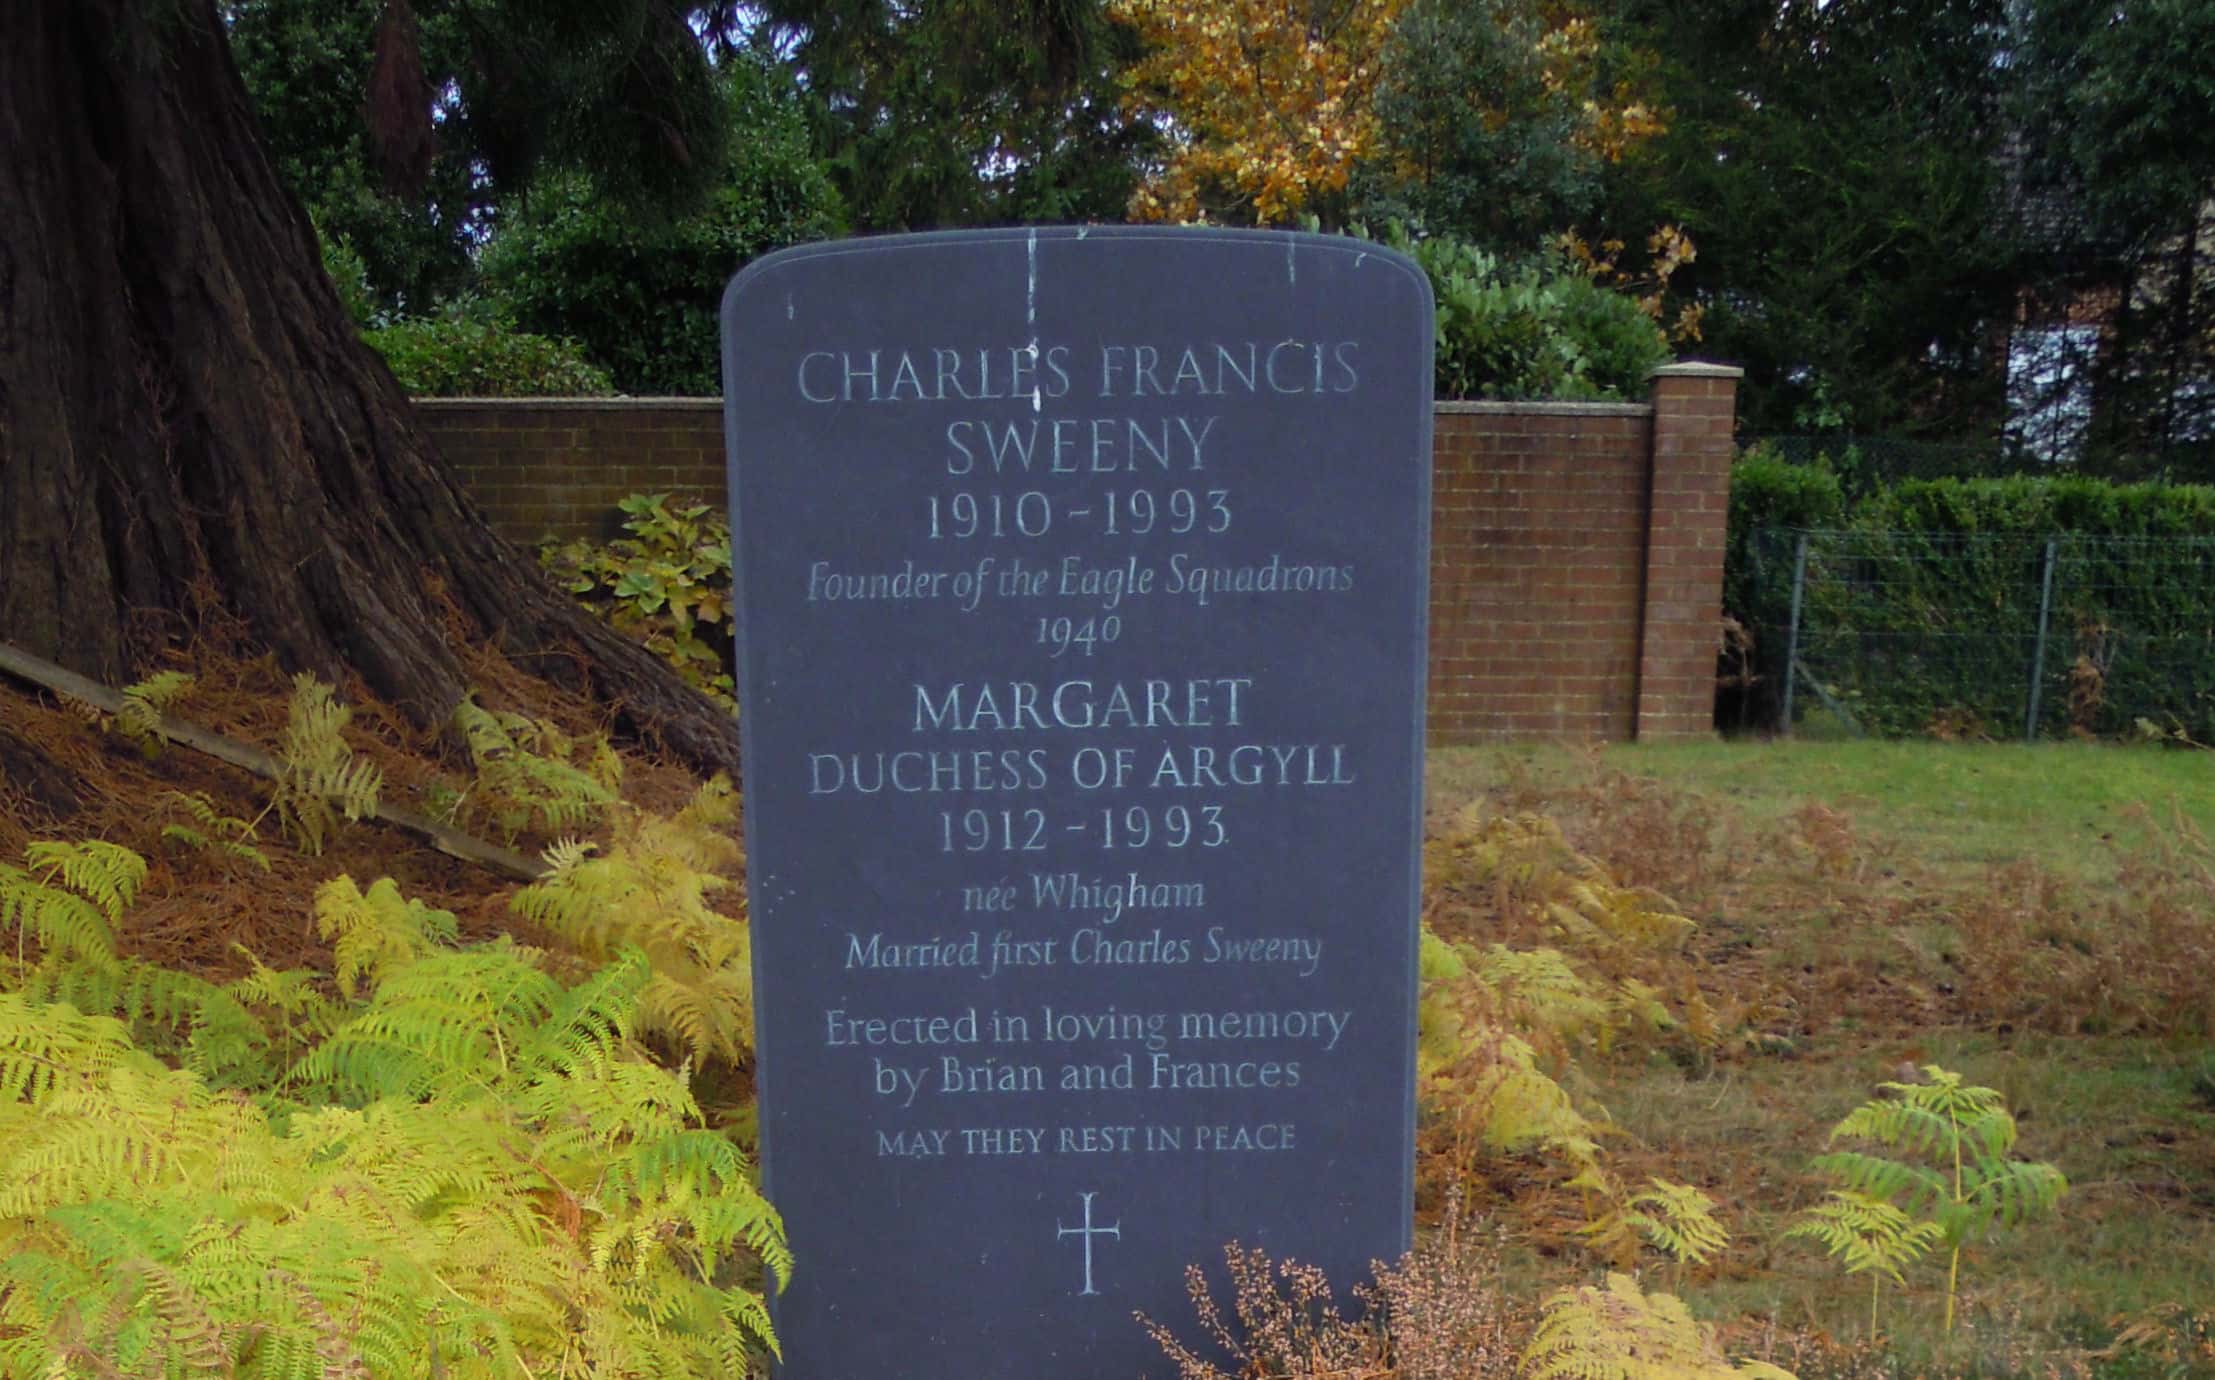 Margaret Campbell, Duchess of Argyll facts